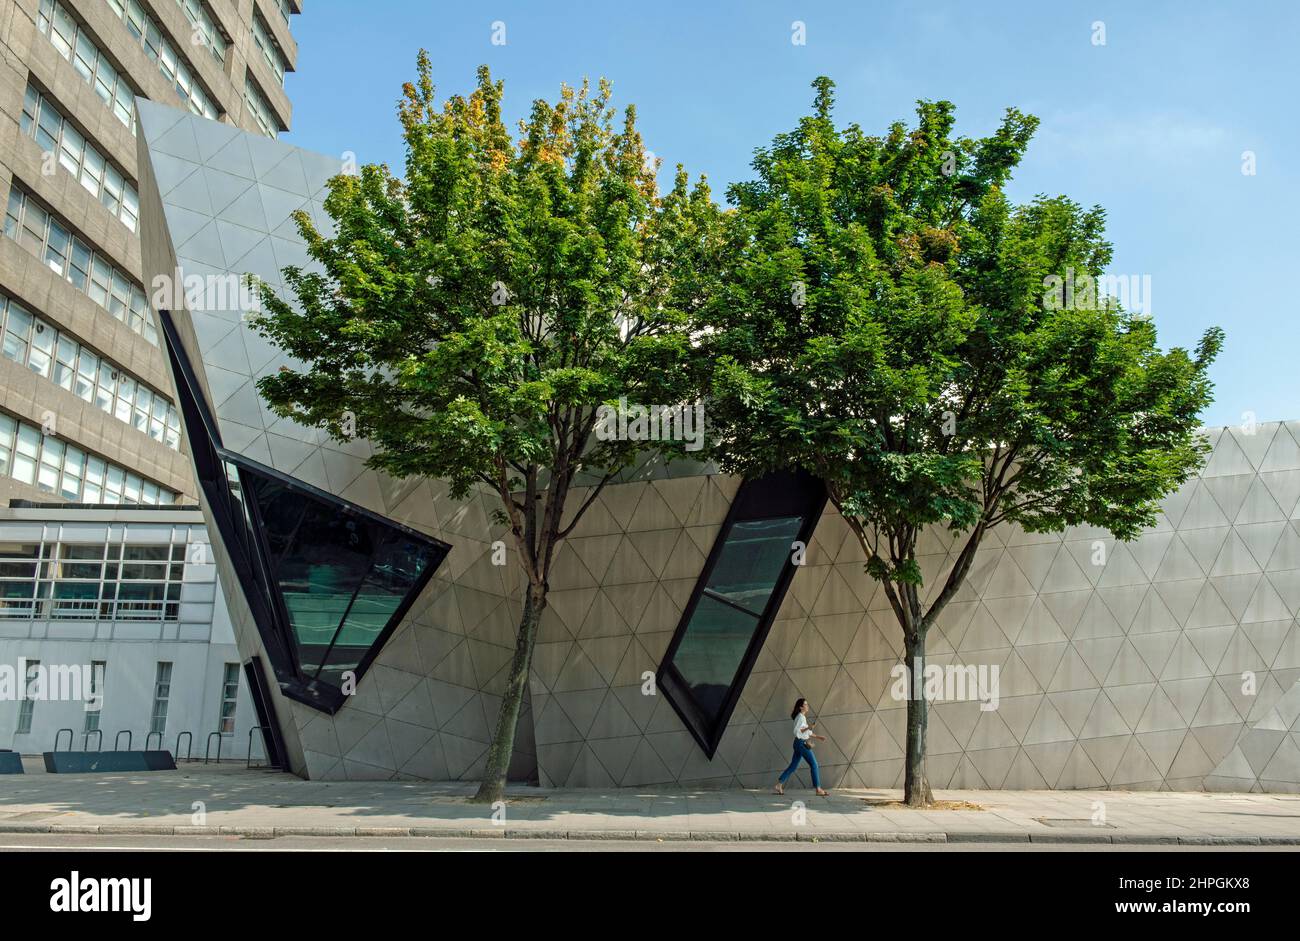 London Metropolitan University Graduate Centre by Daniel Libeskind with trees in front, Holloway Road Campus Stock Photo